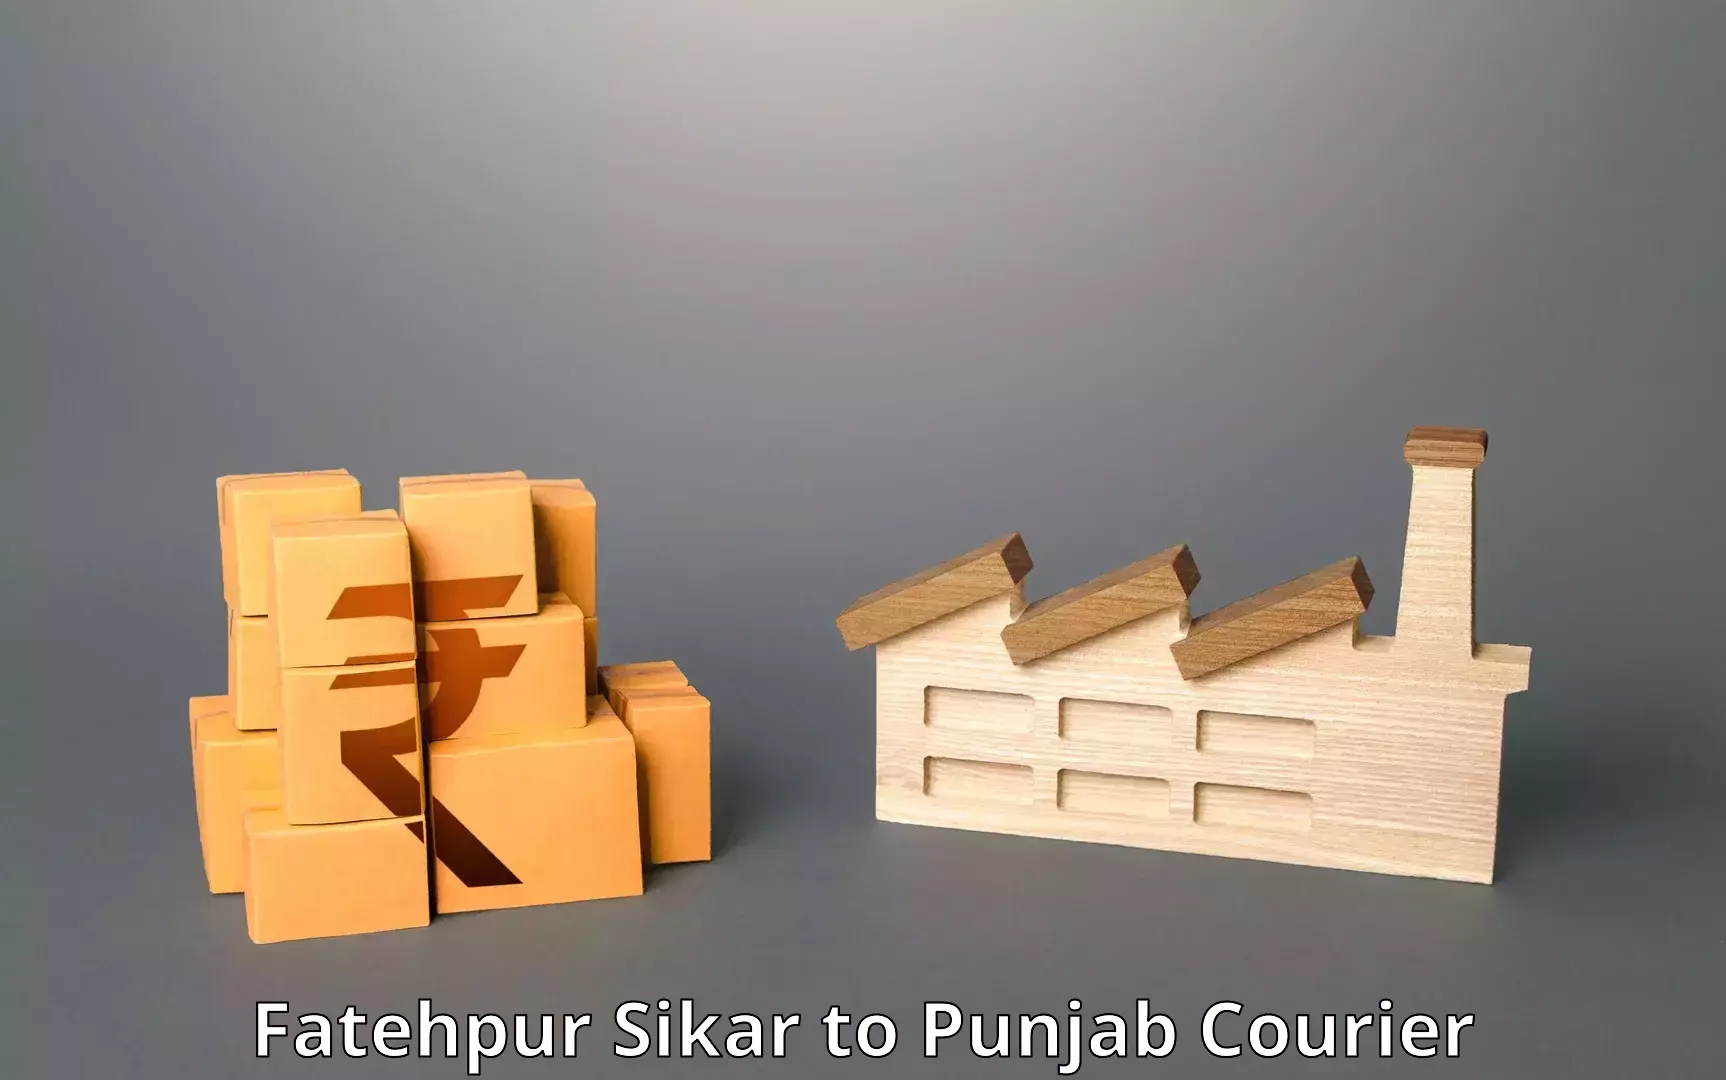 On-call courier service Fatehpur Sikar to Zirakpur